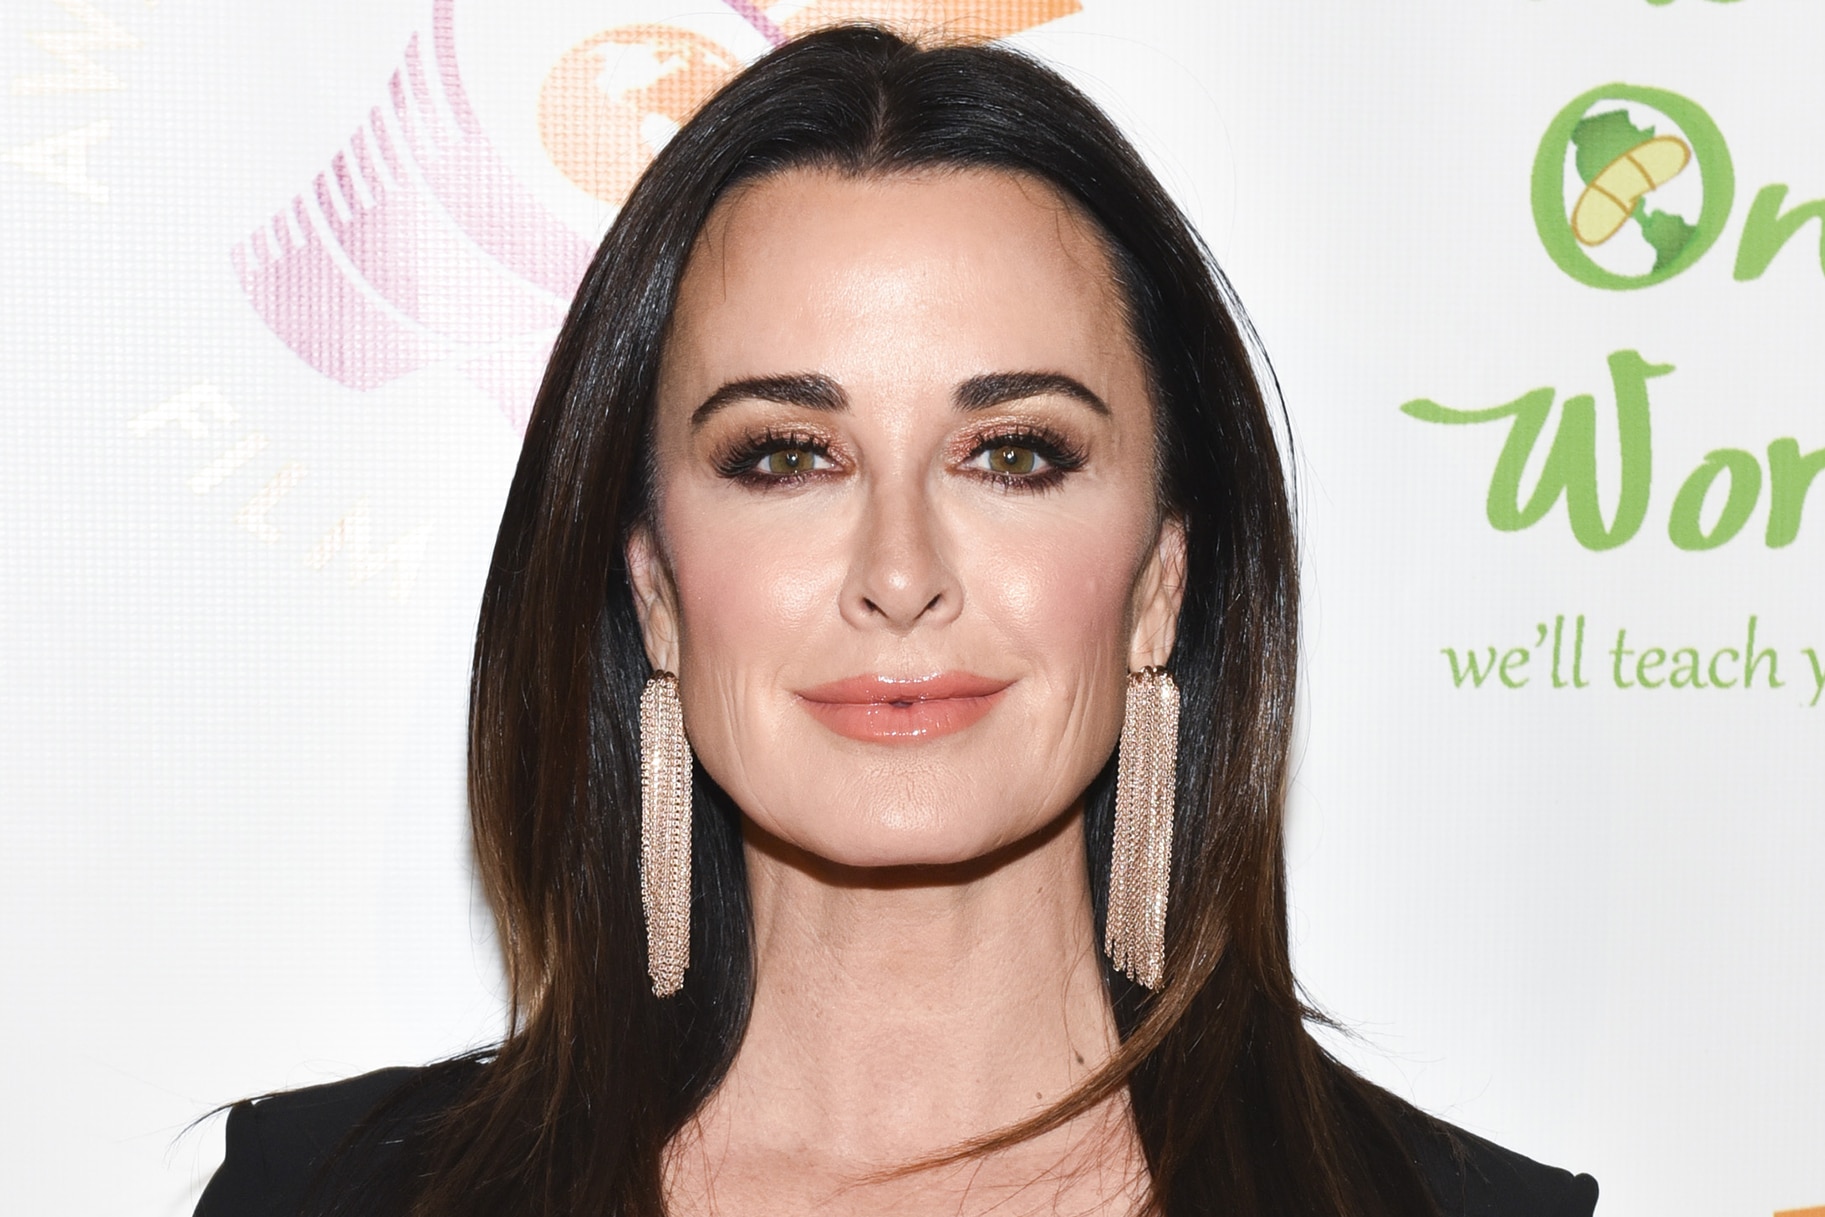 Kyle Richards Gets Lighter Brown Hair Color with Highlights Style